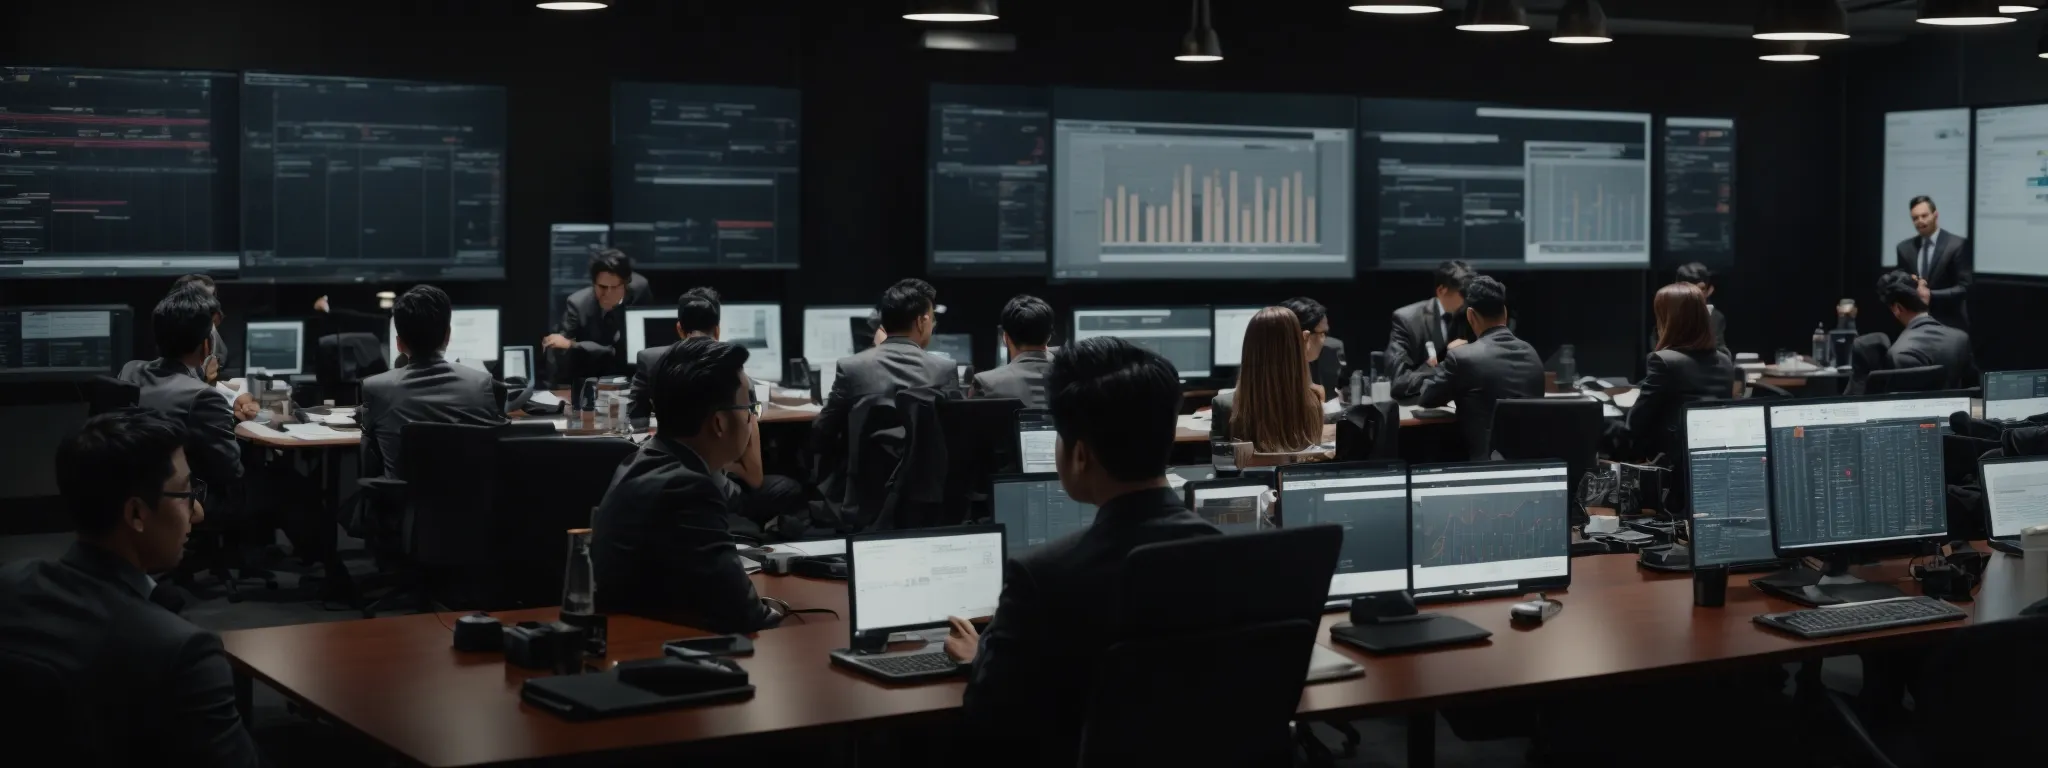 a group of professionals gathered around a conference table, brainstorming over multiple computer screens displaying analytics and seo metrics.